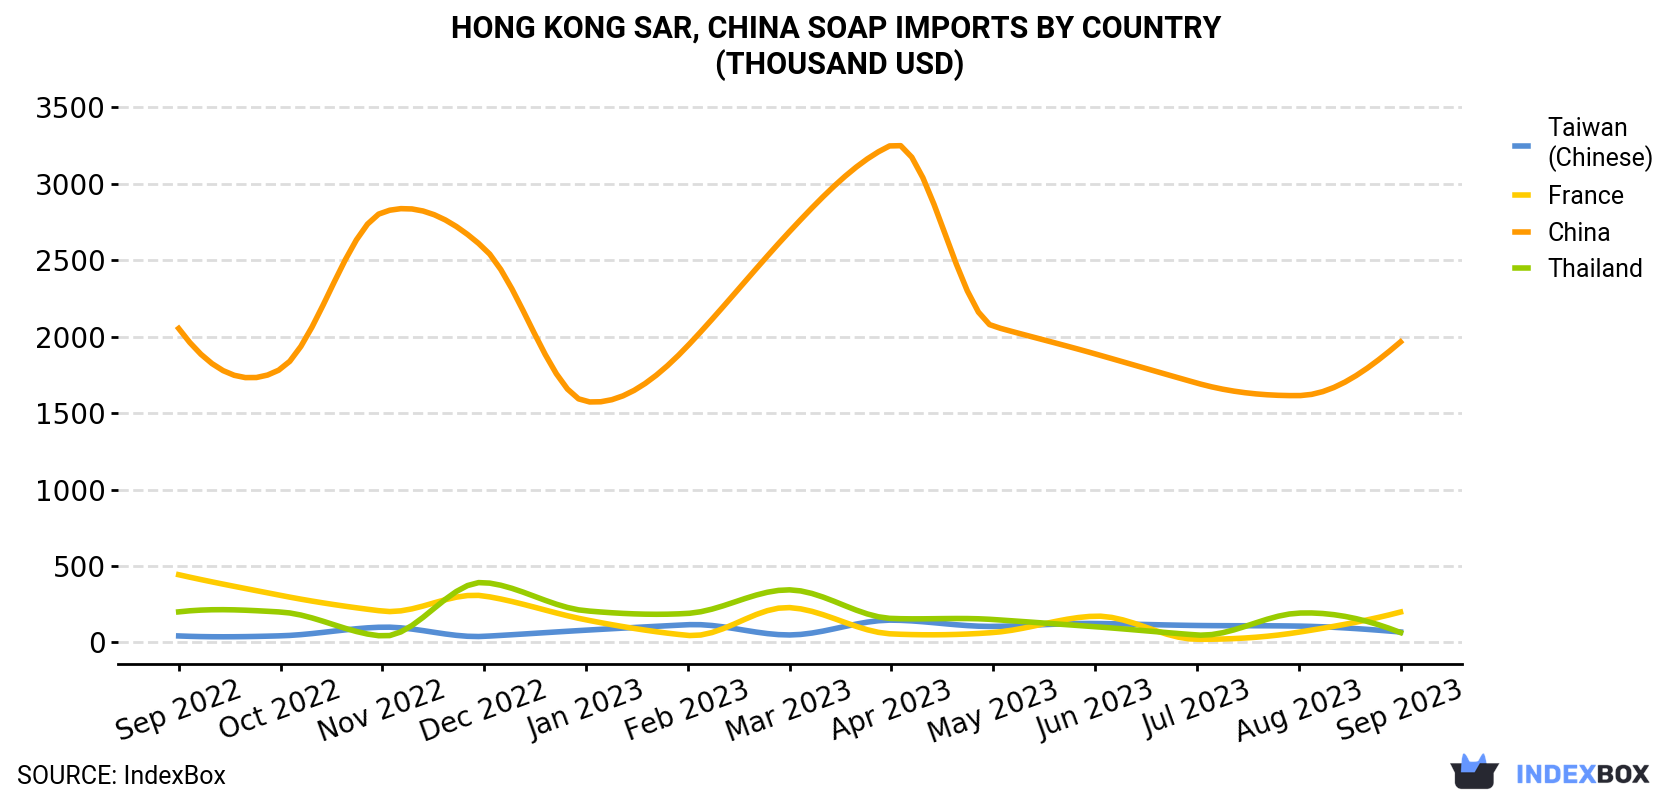 Hong Kong Soap Imports By Country (Thousand USD)